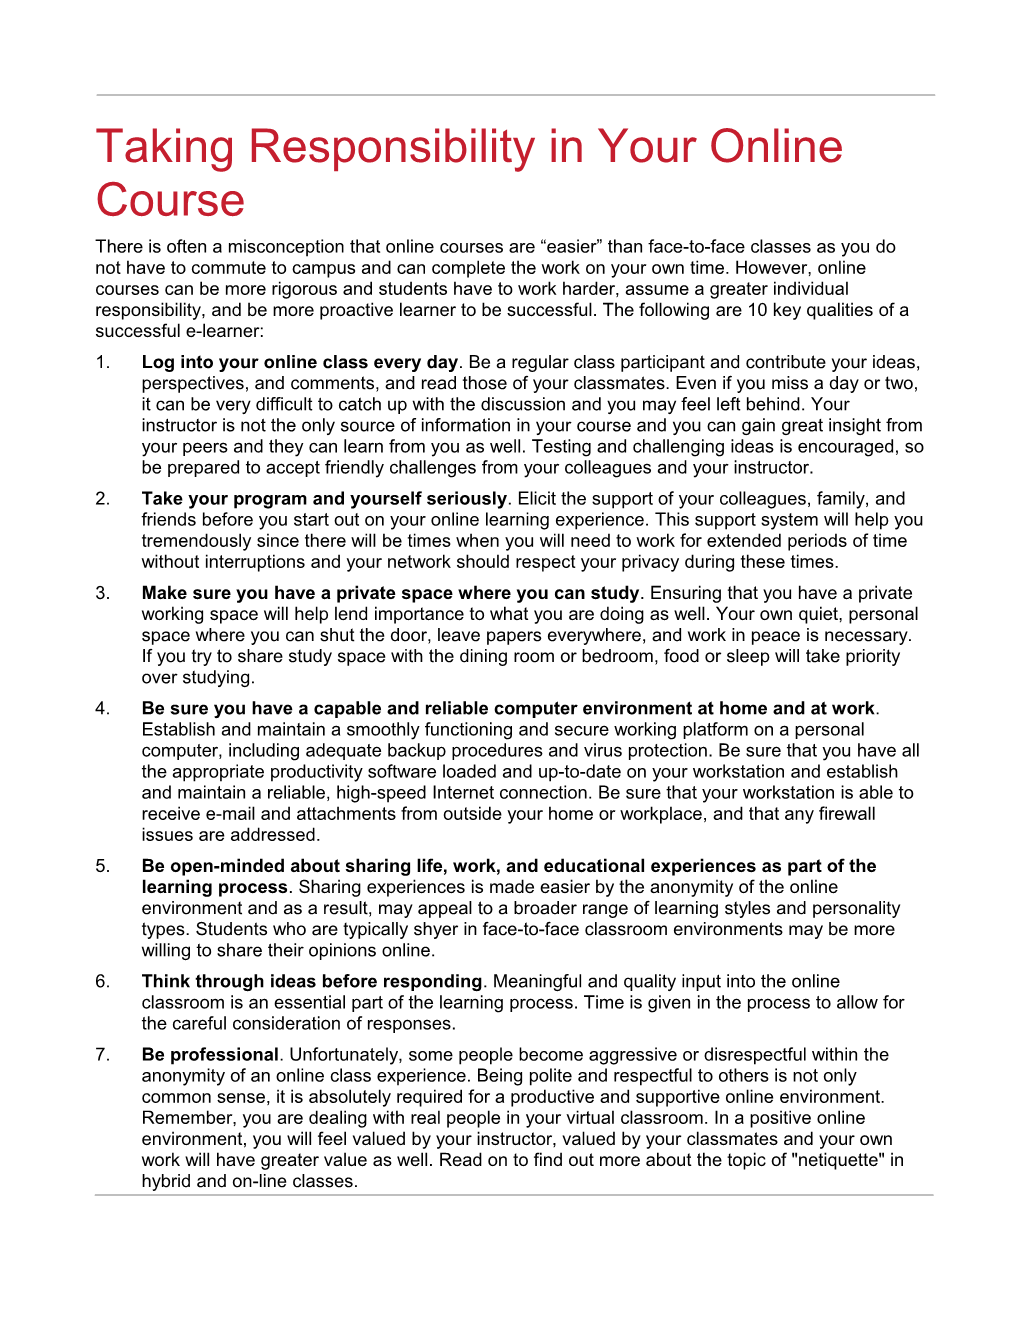 Taking Responsibility in Your Online Course